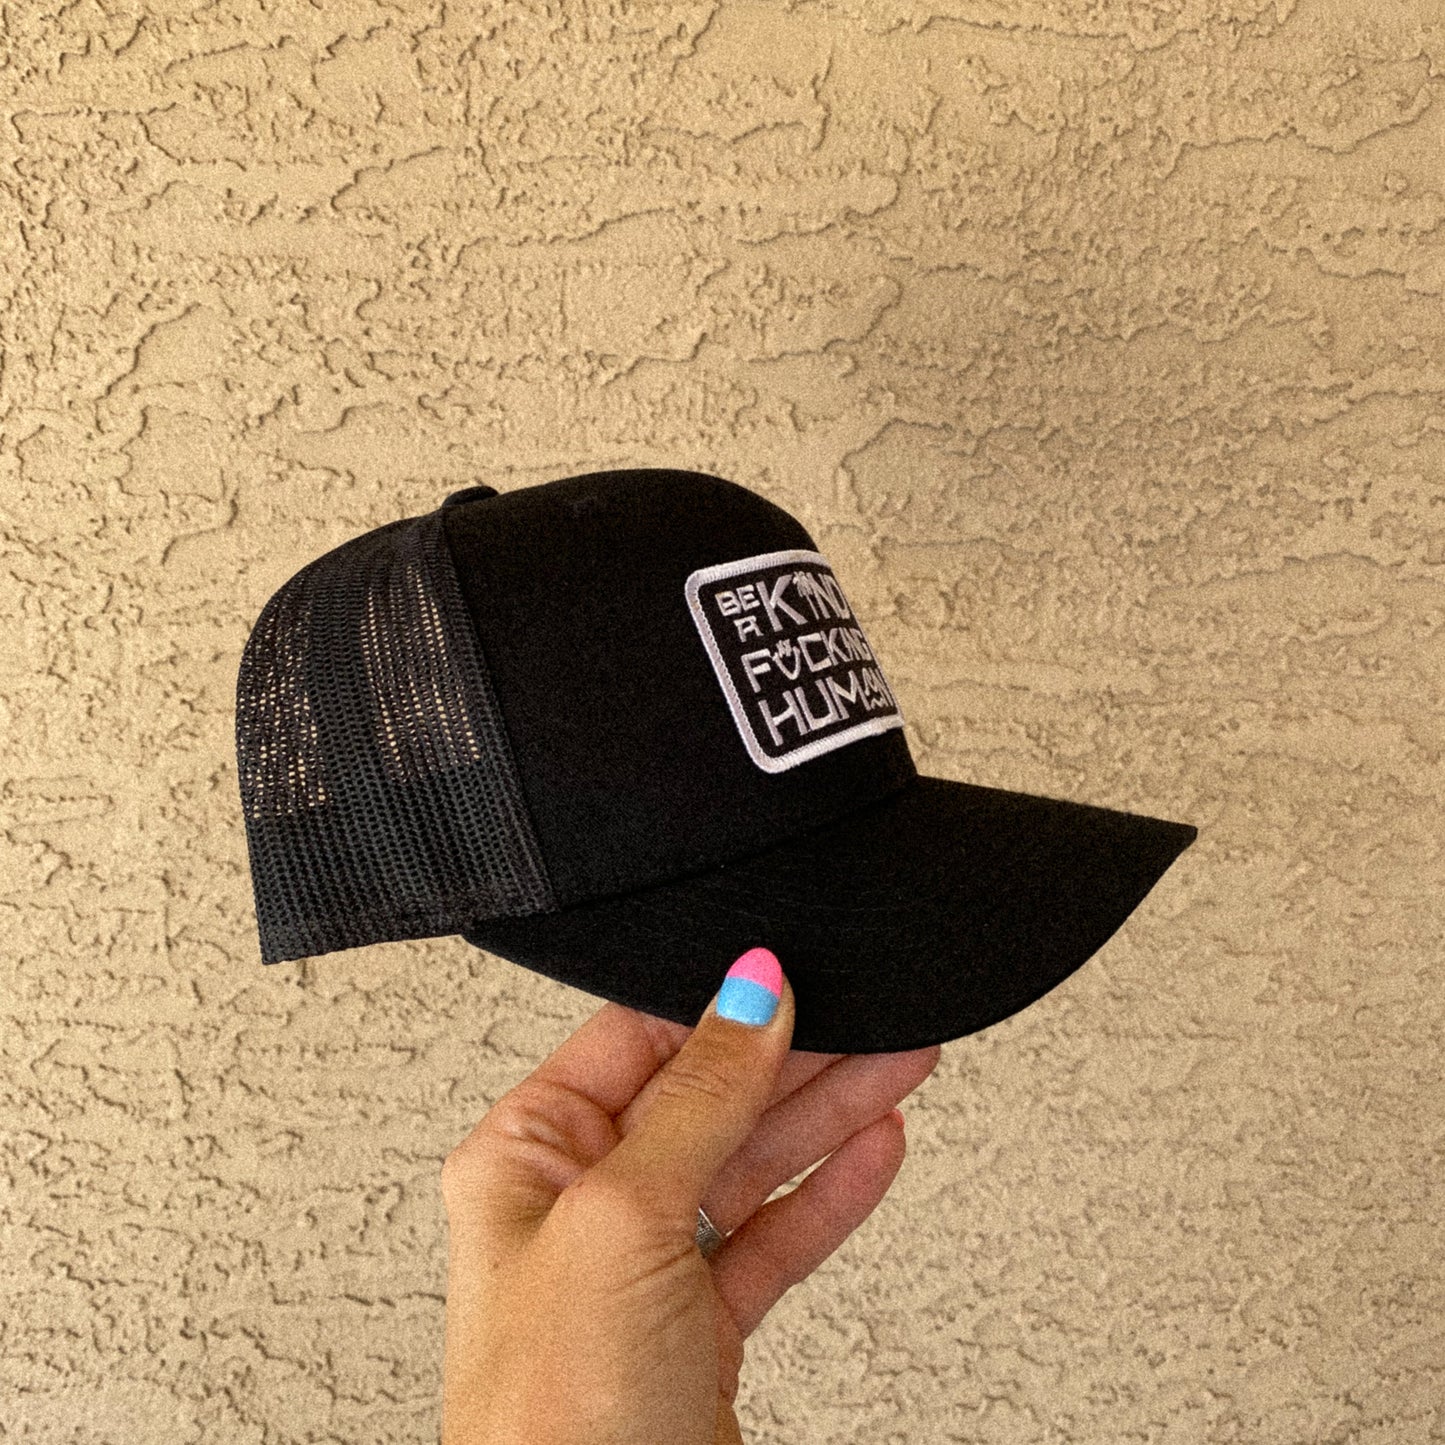 MEN'S BE A KIND HUMAN HAT - BLACK PATCH, CURVED